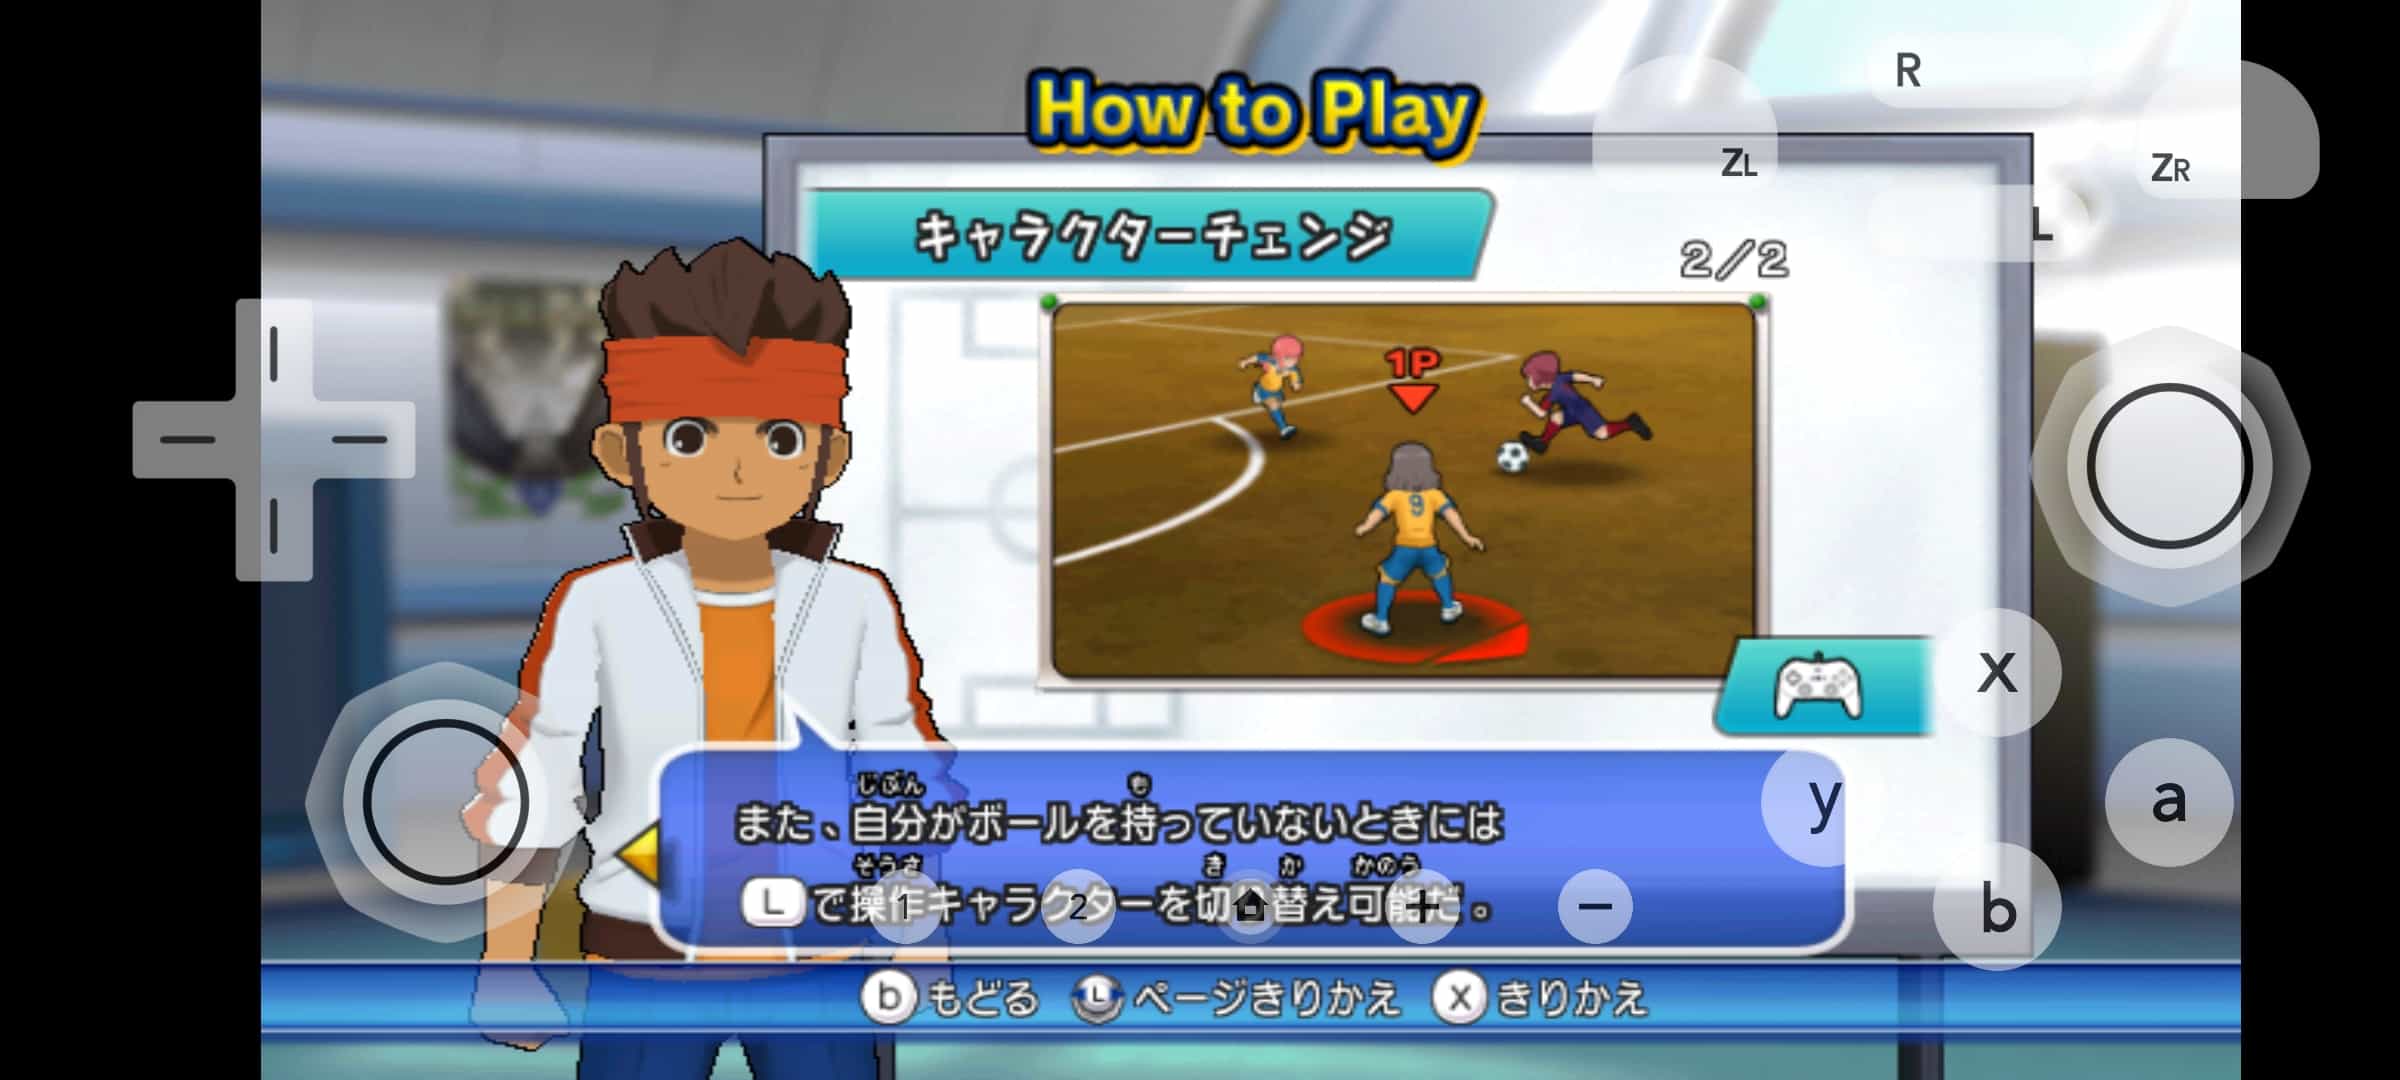 How to Download INAZUMA ELEVEN GO STRIKERS 2013